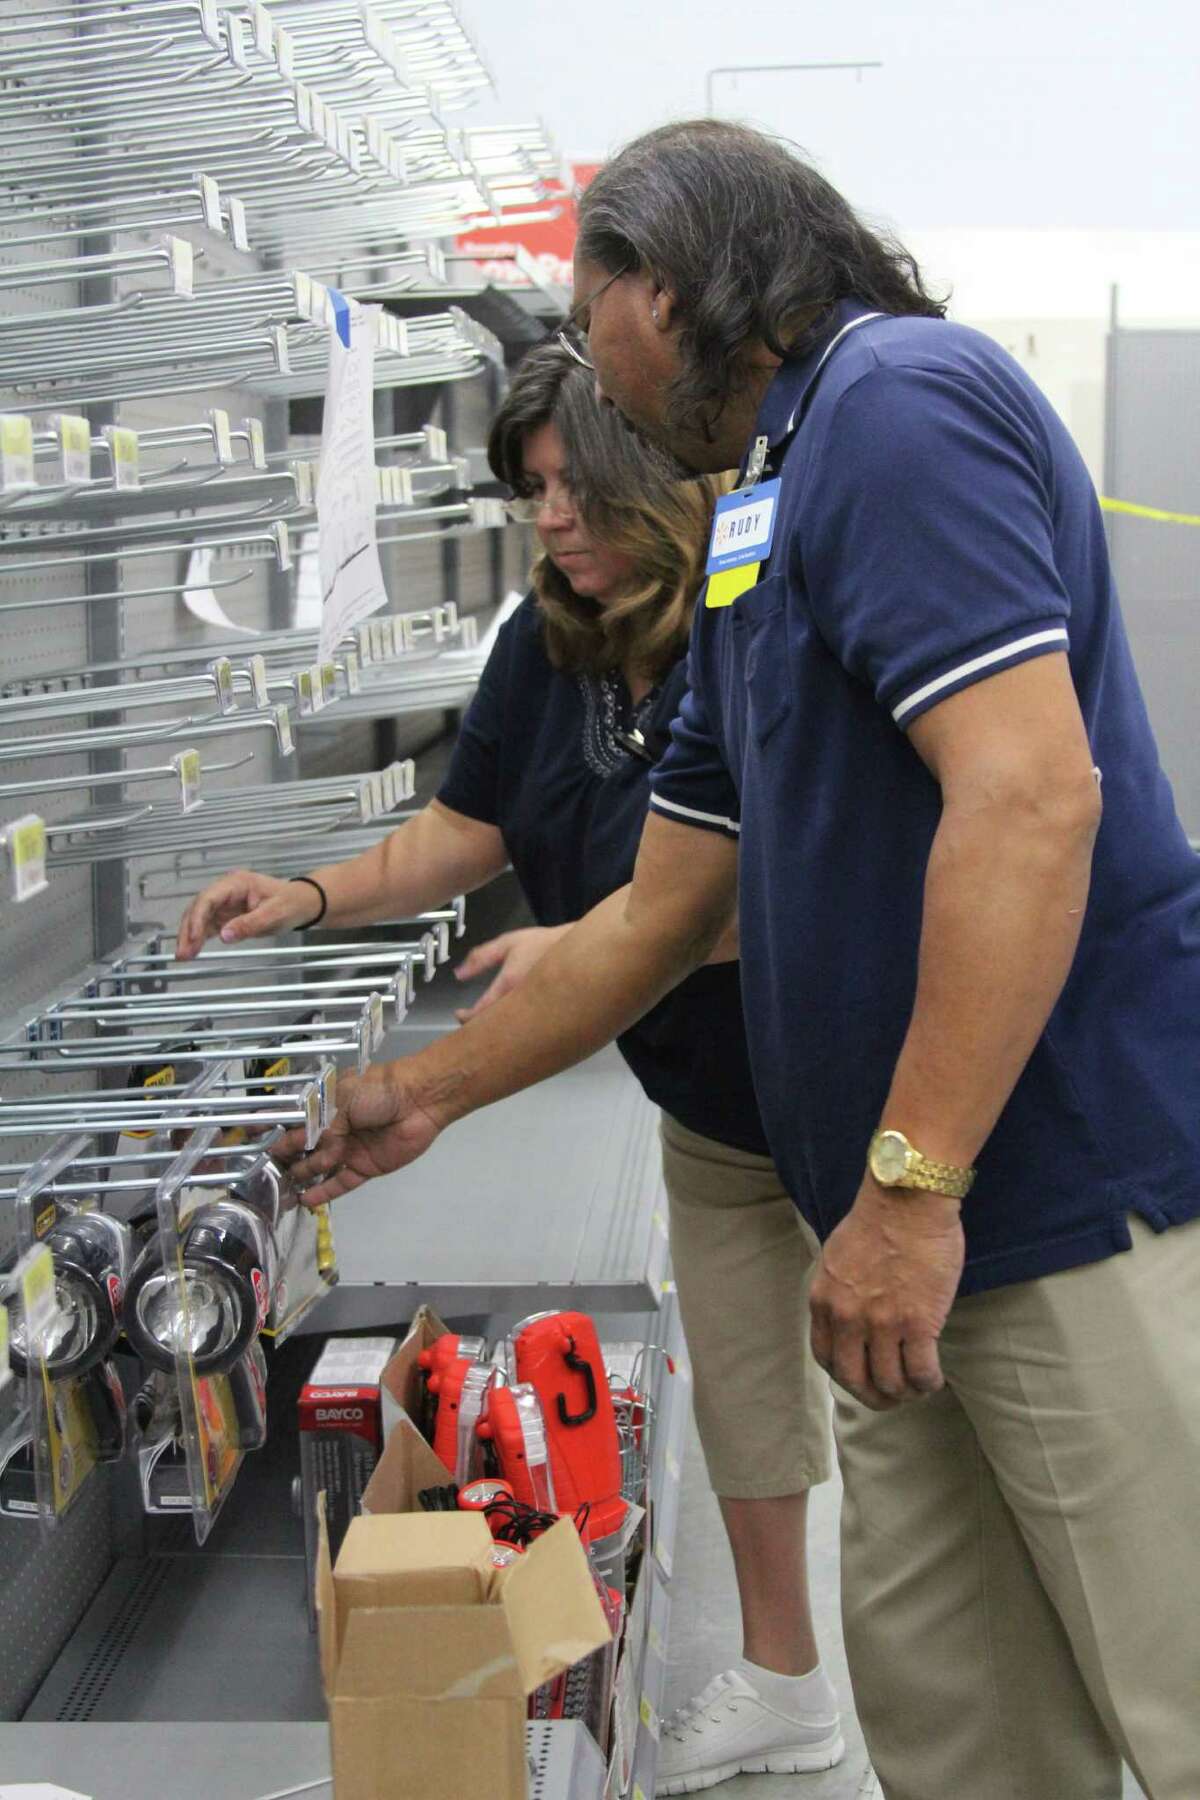 Walmart employees Aggie Rosas and Rudy Avila stock the automotive department shelves as they prepare for the April 10 opening of a new Walmart in Helotes.